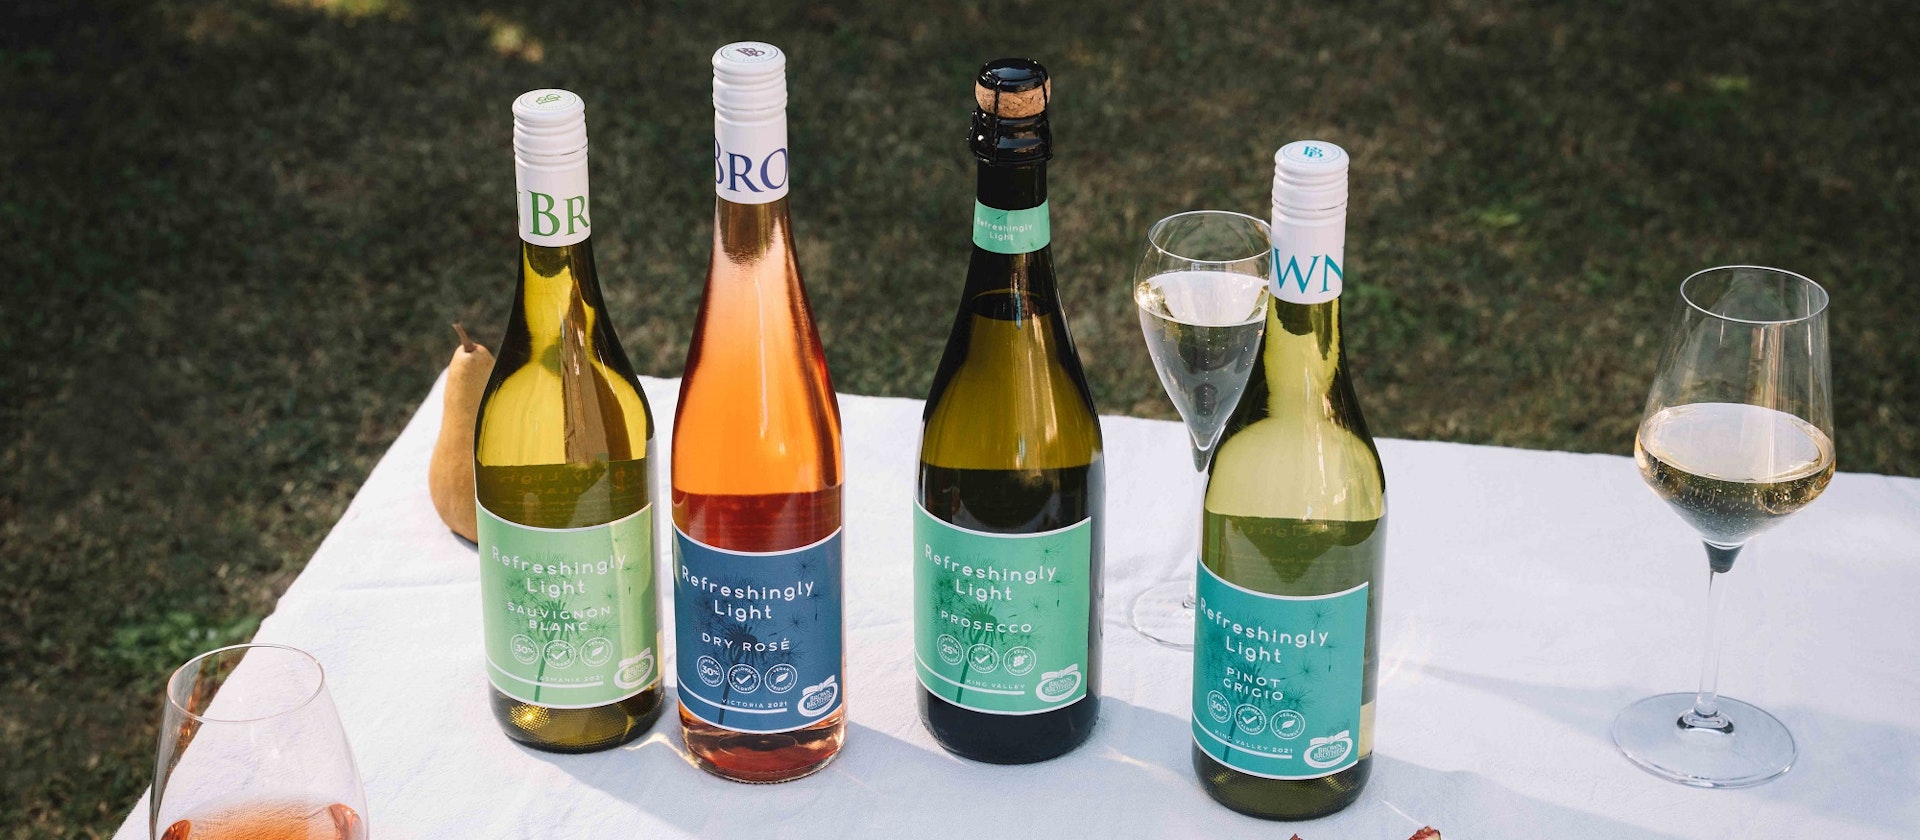 range of Refreshingly light wines on a table outdoors